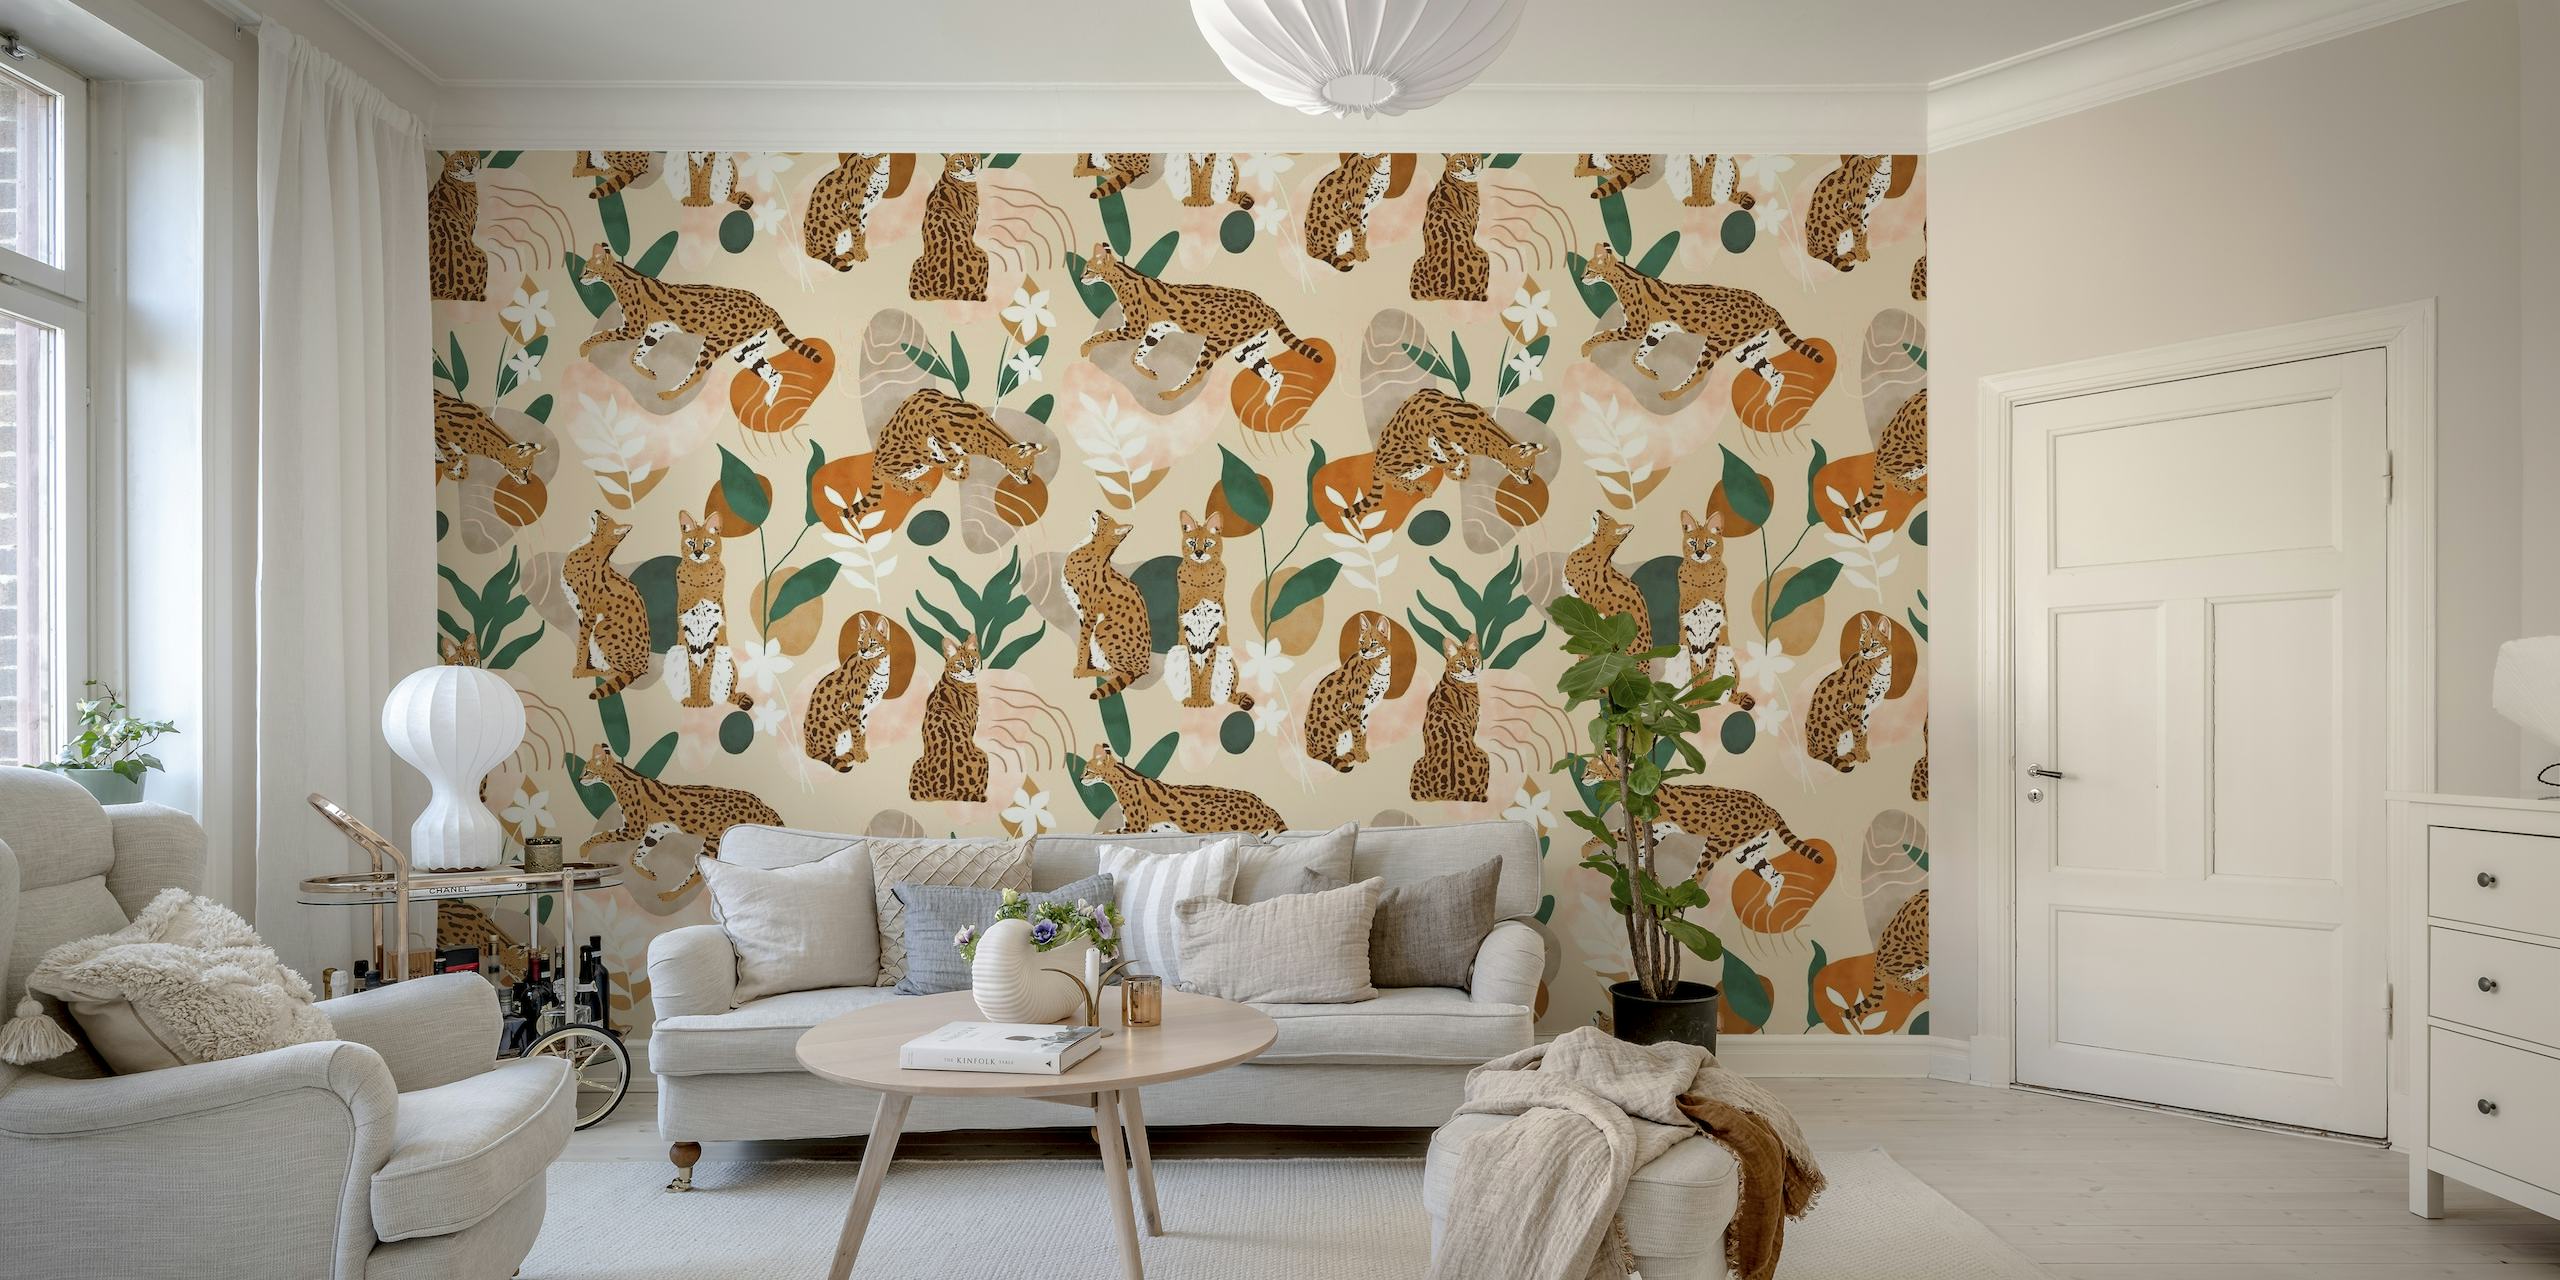 Serval cat abstract nature wall mural with stylized felines and plant motifs on a neutral background.